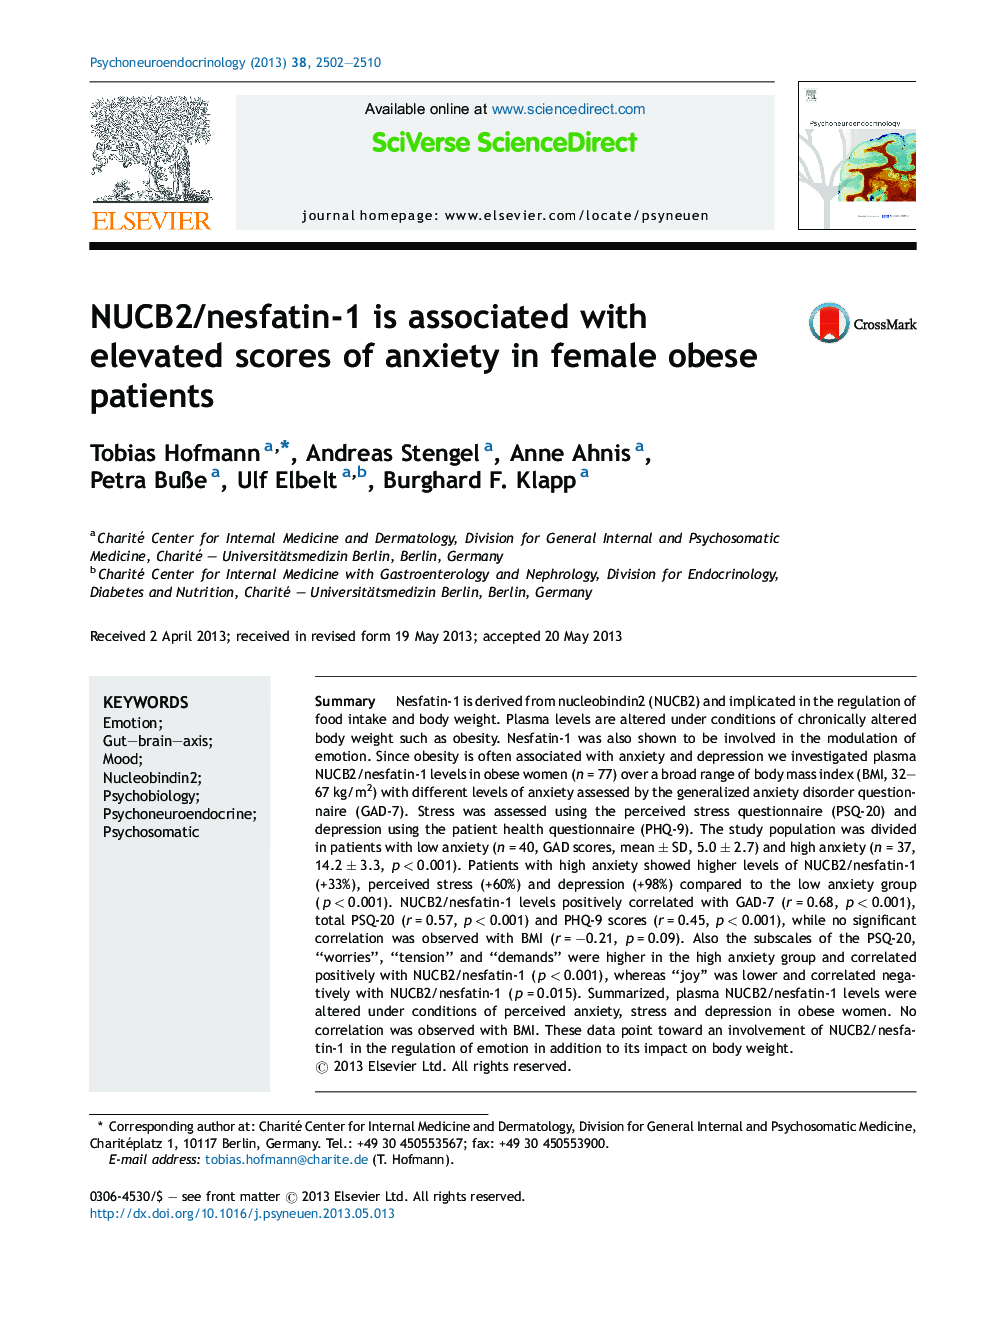 NUCB2/nesfatin-1 is associated with elevated scores of anxiety in female obese patients